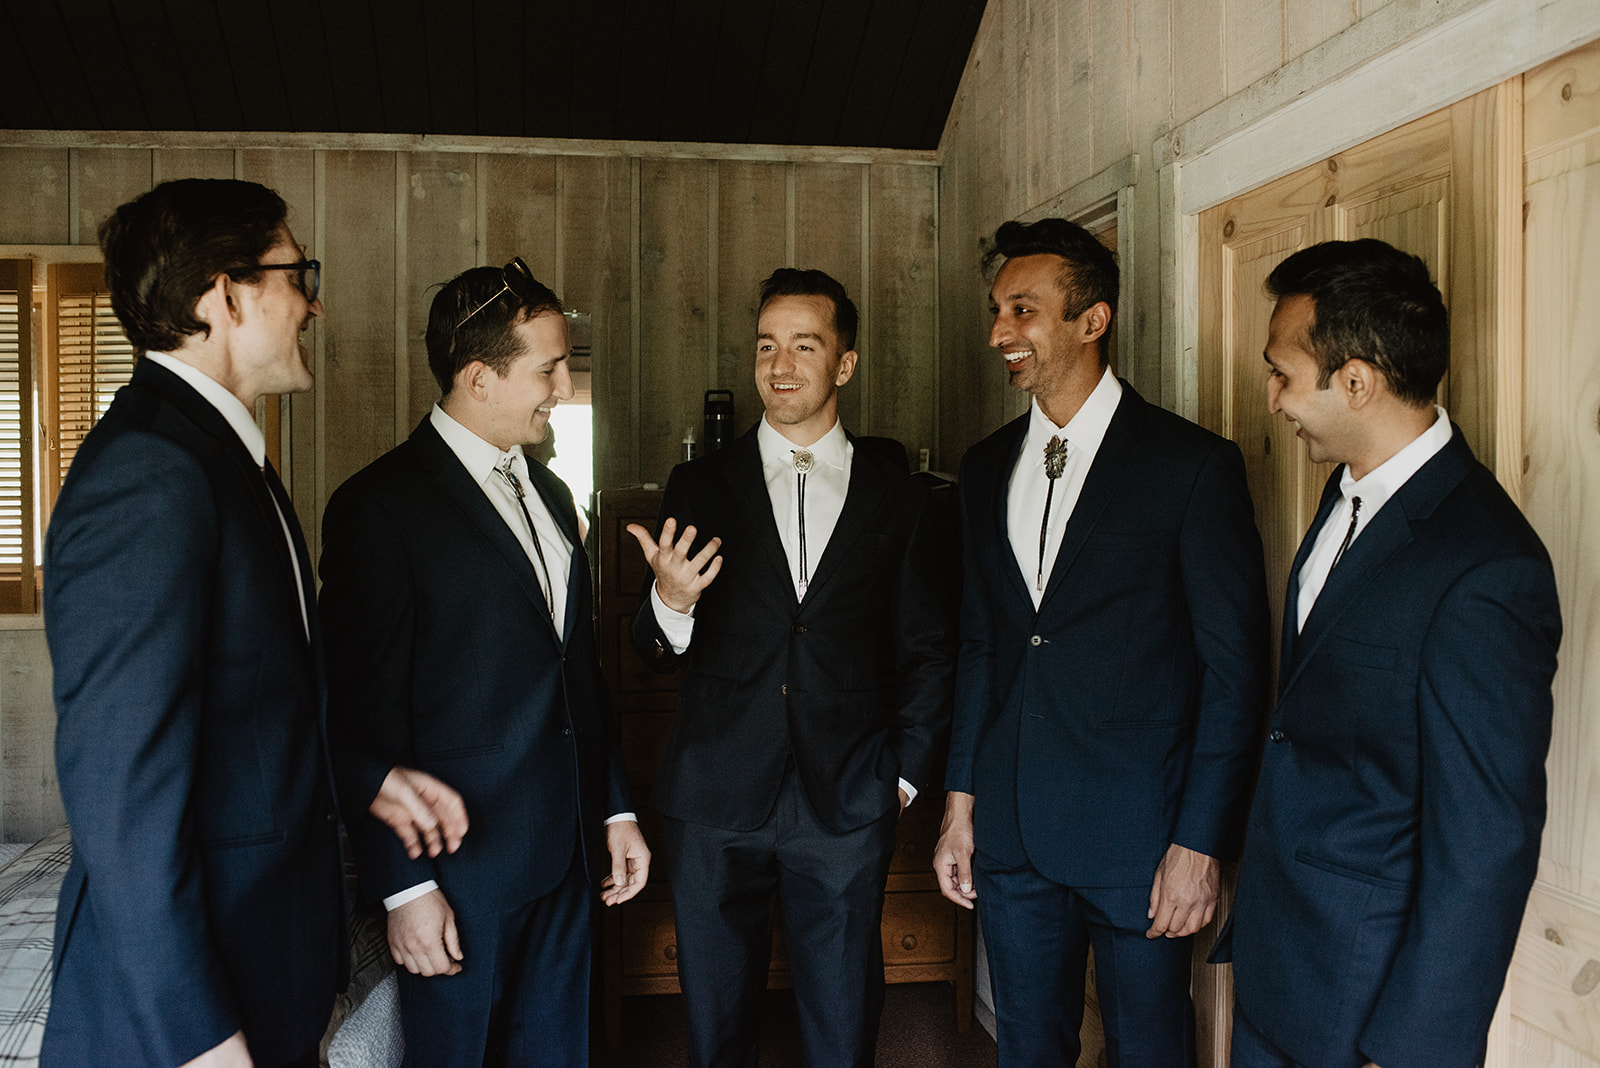 groom standing with his groomsmen before the ceremony